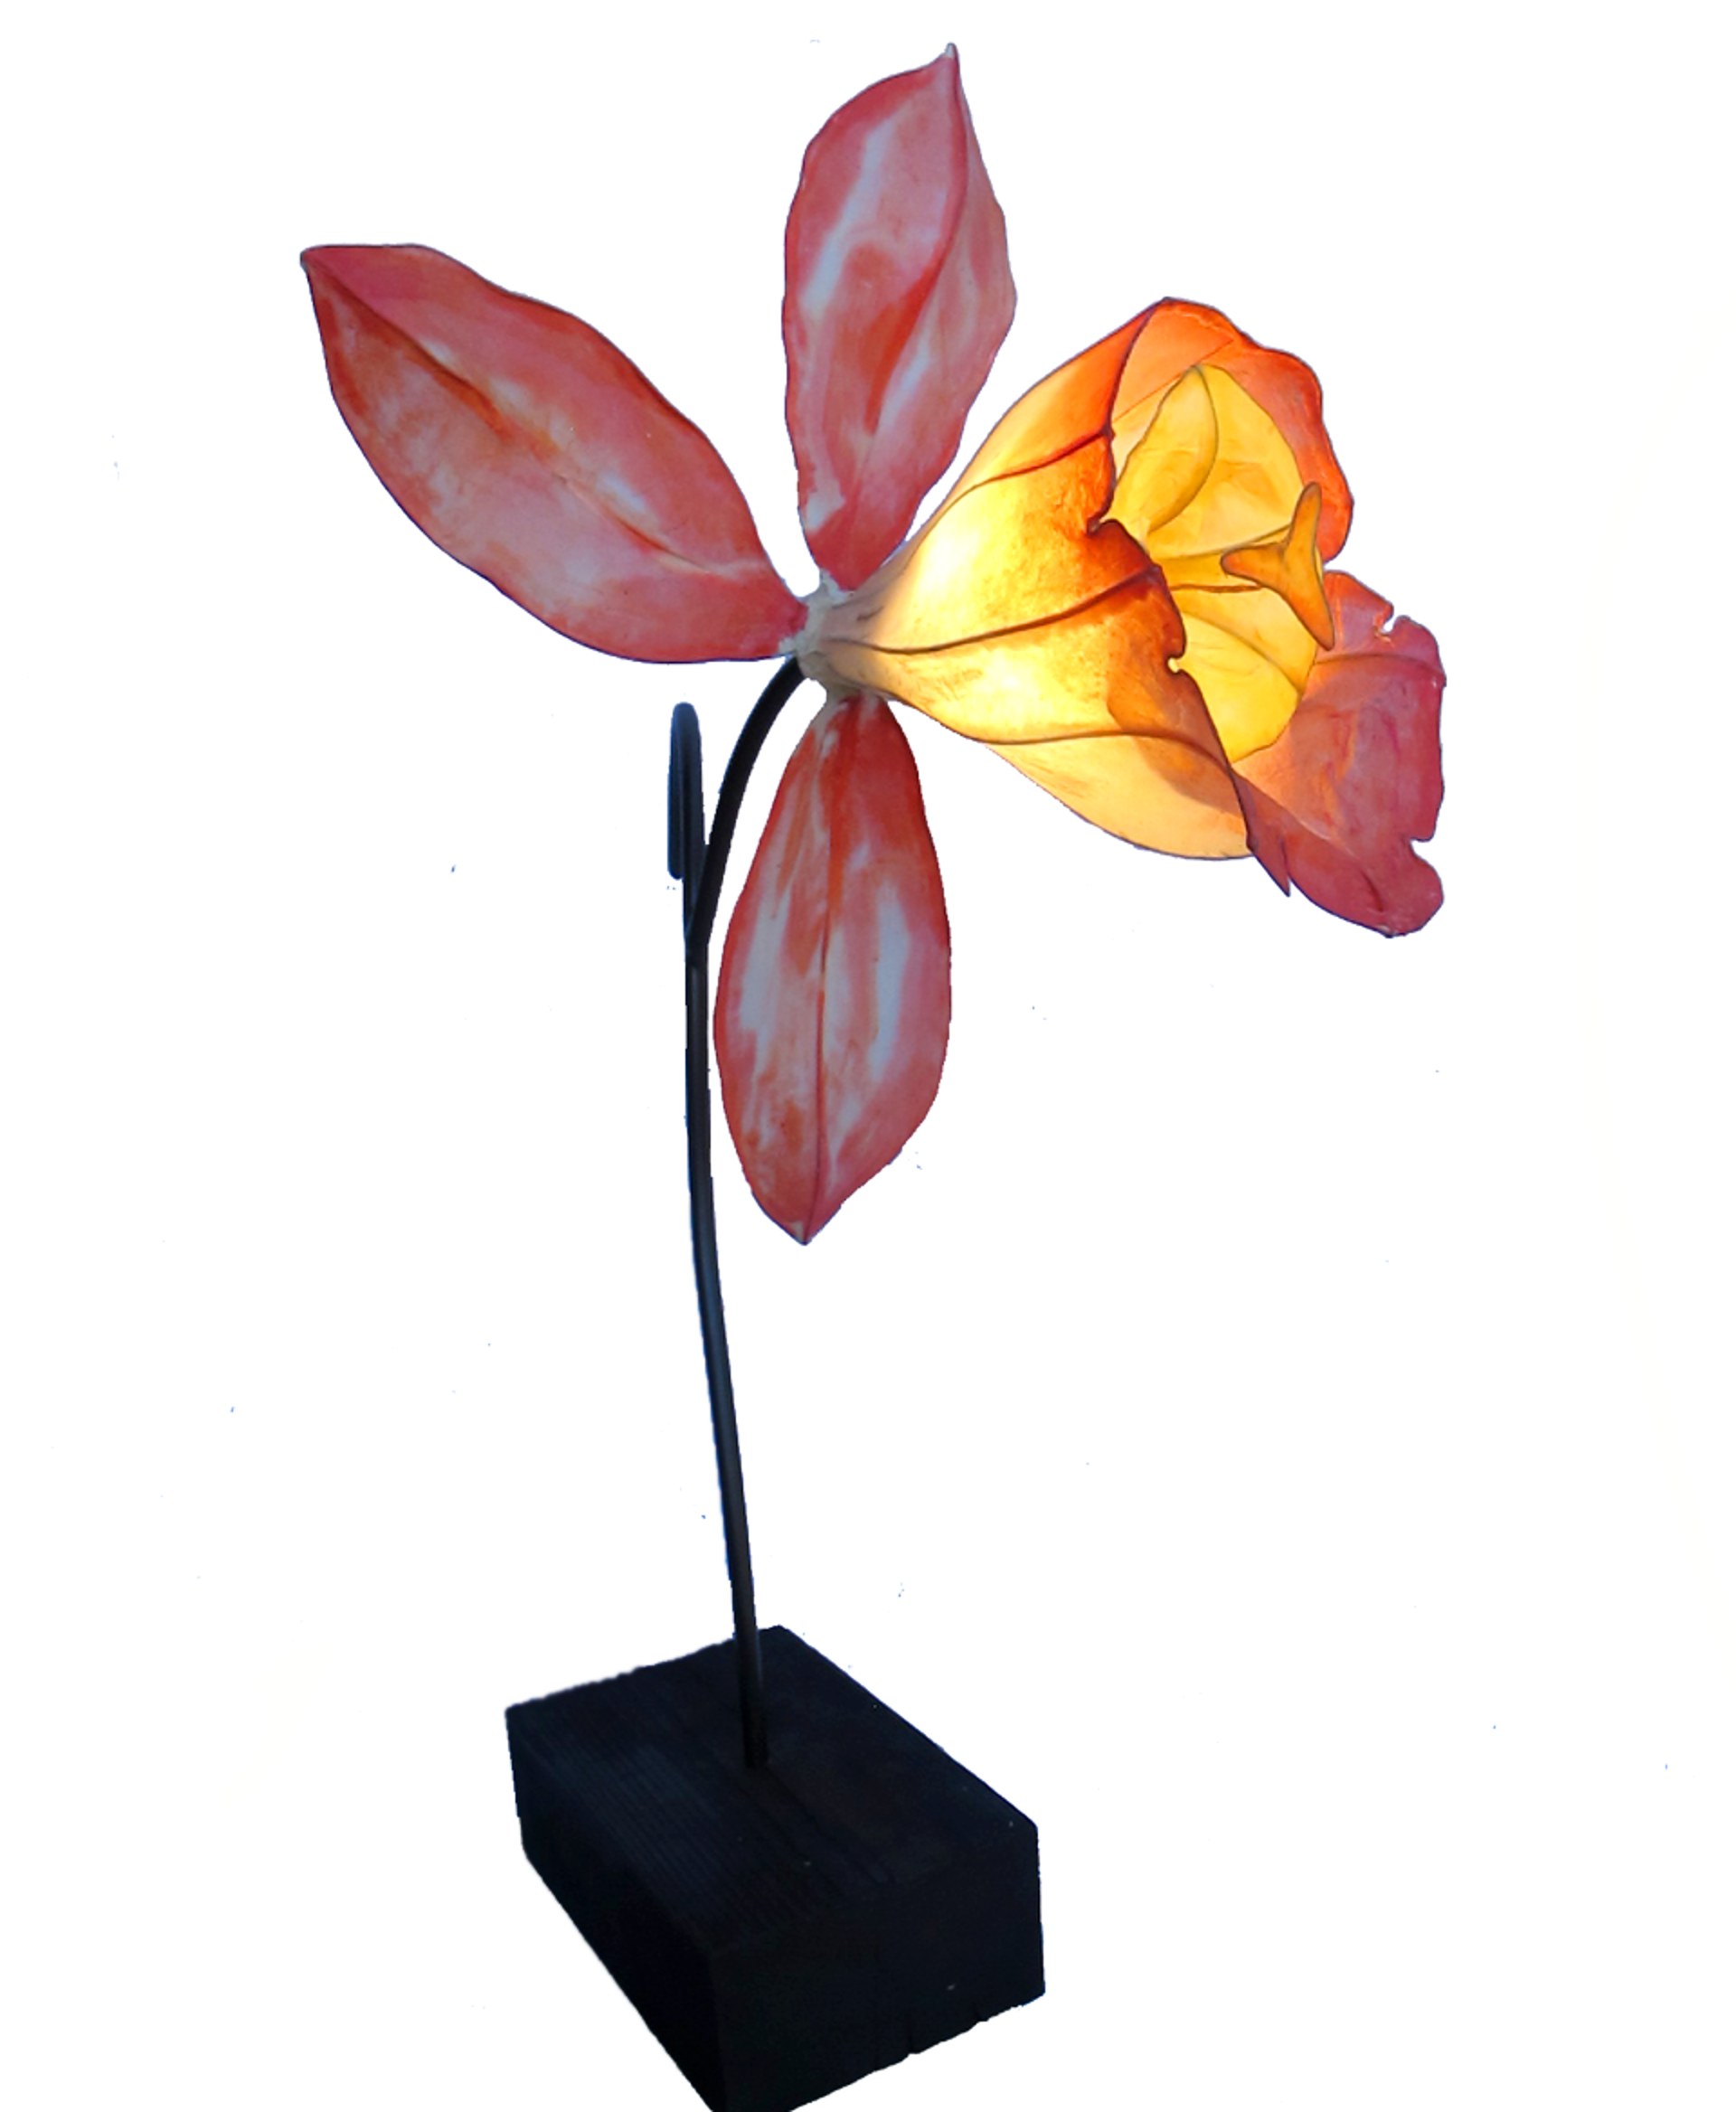 Self Pollinating | Crimson Orchid by HiiH Lights